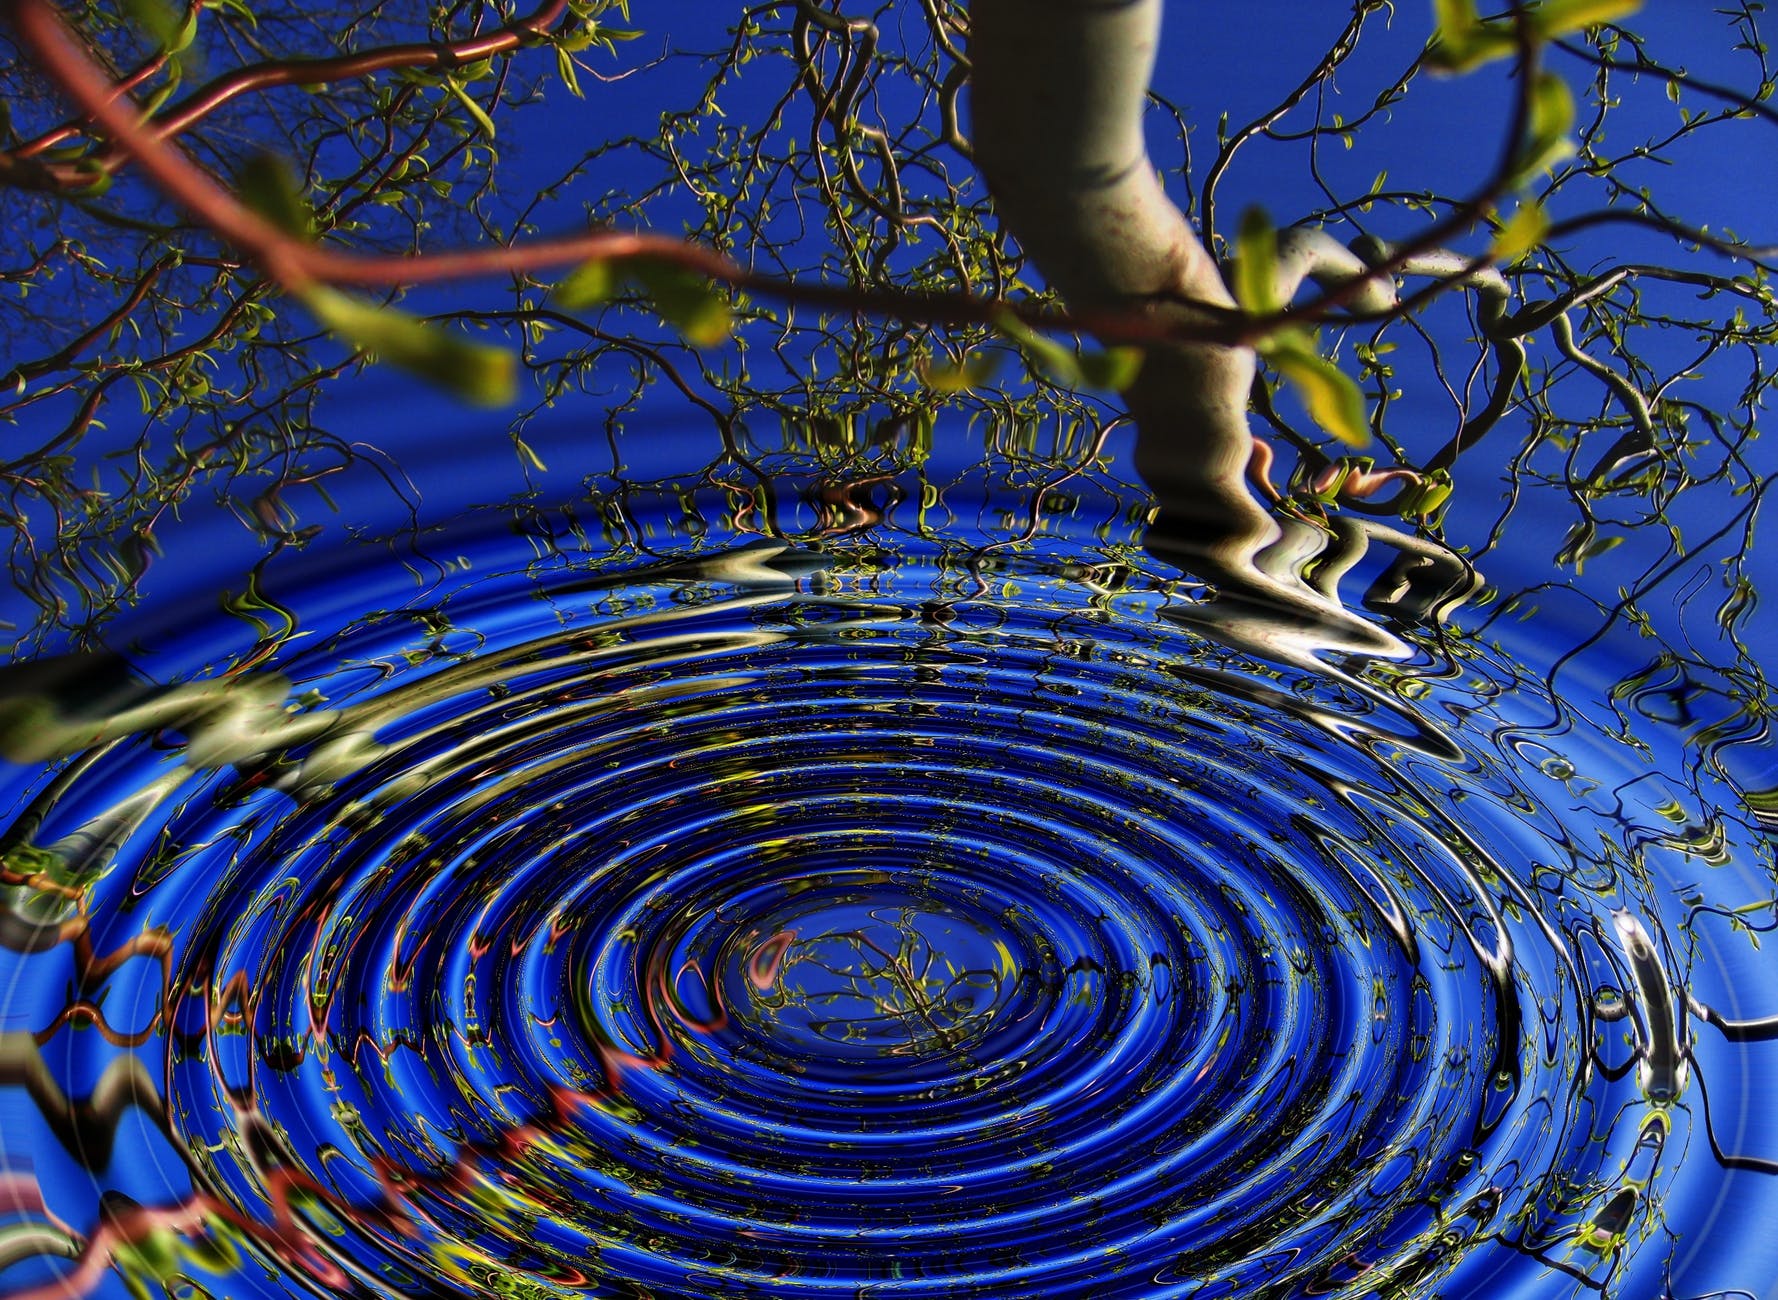 hypnotized by a drop of water in a pond